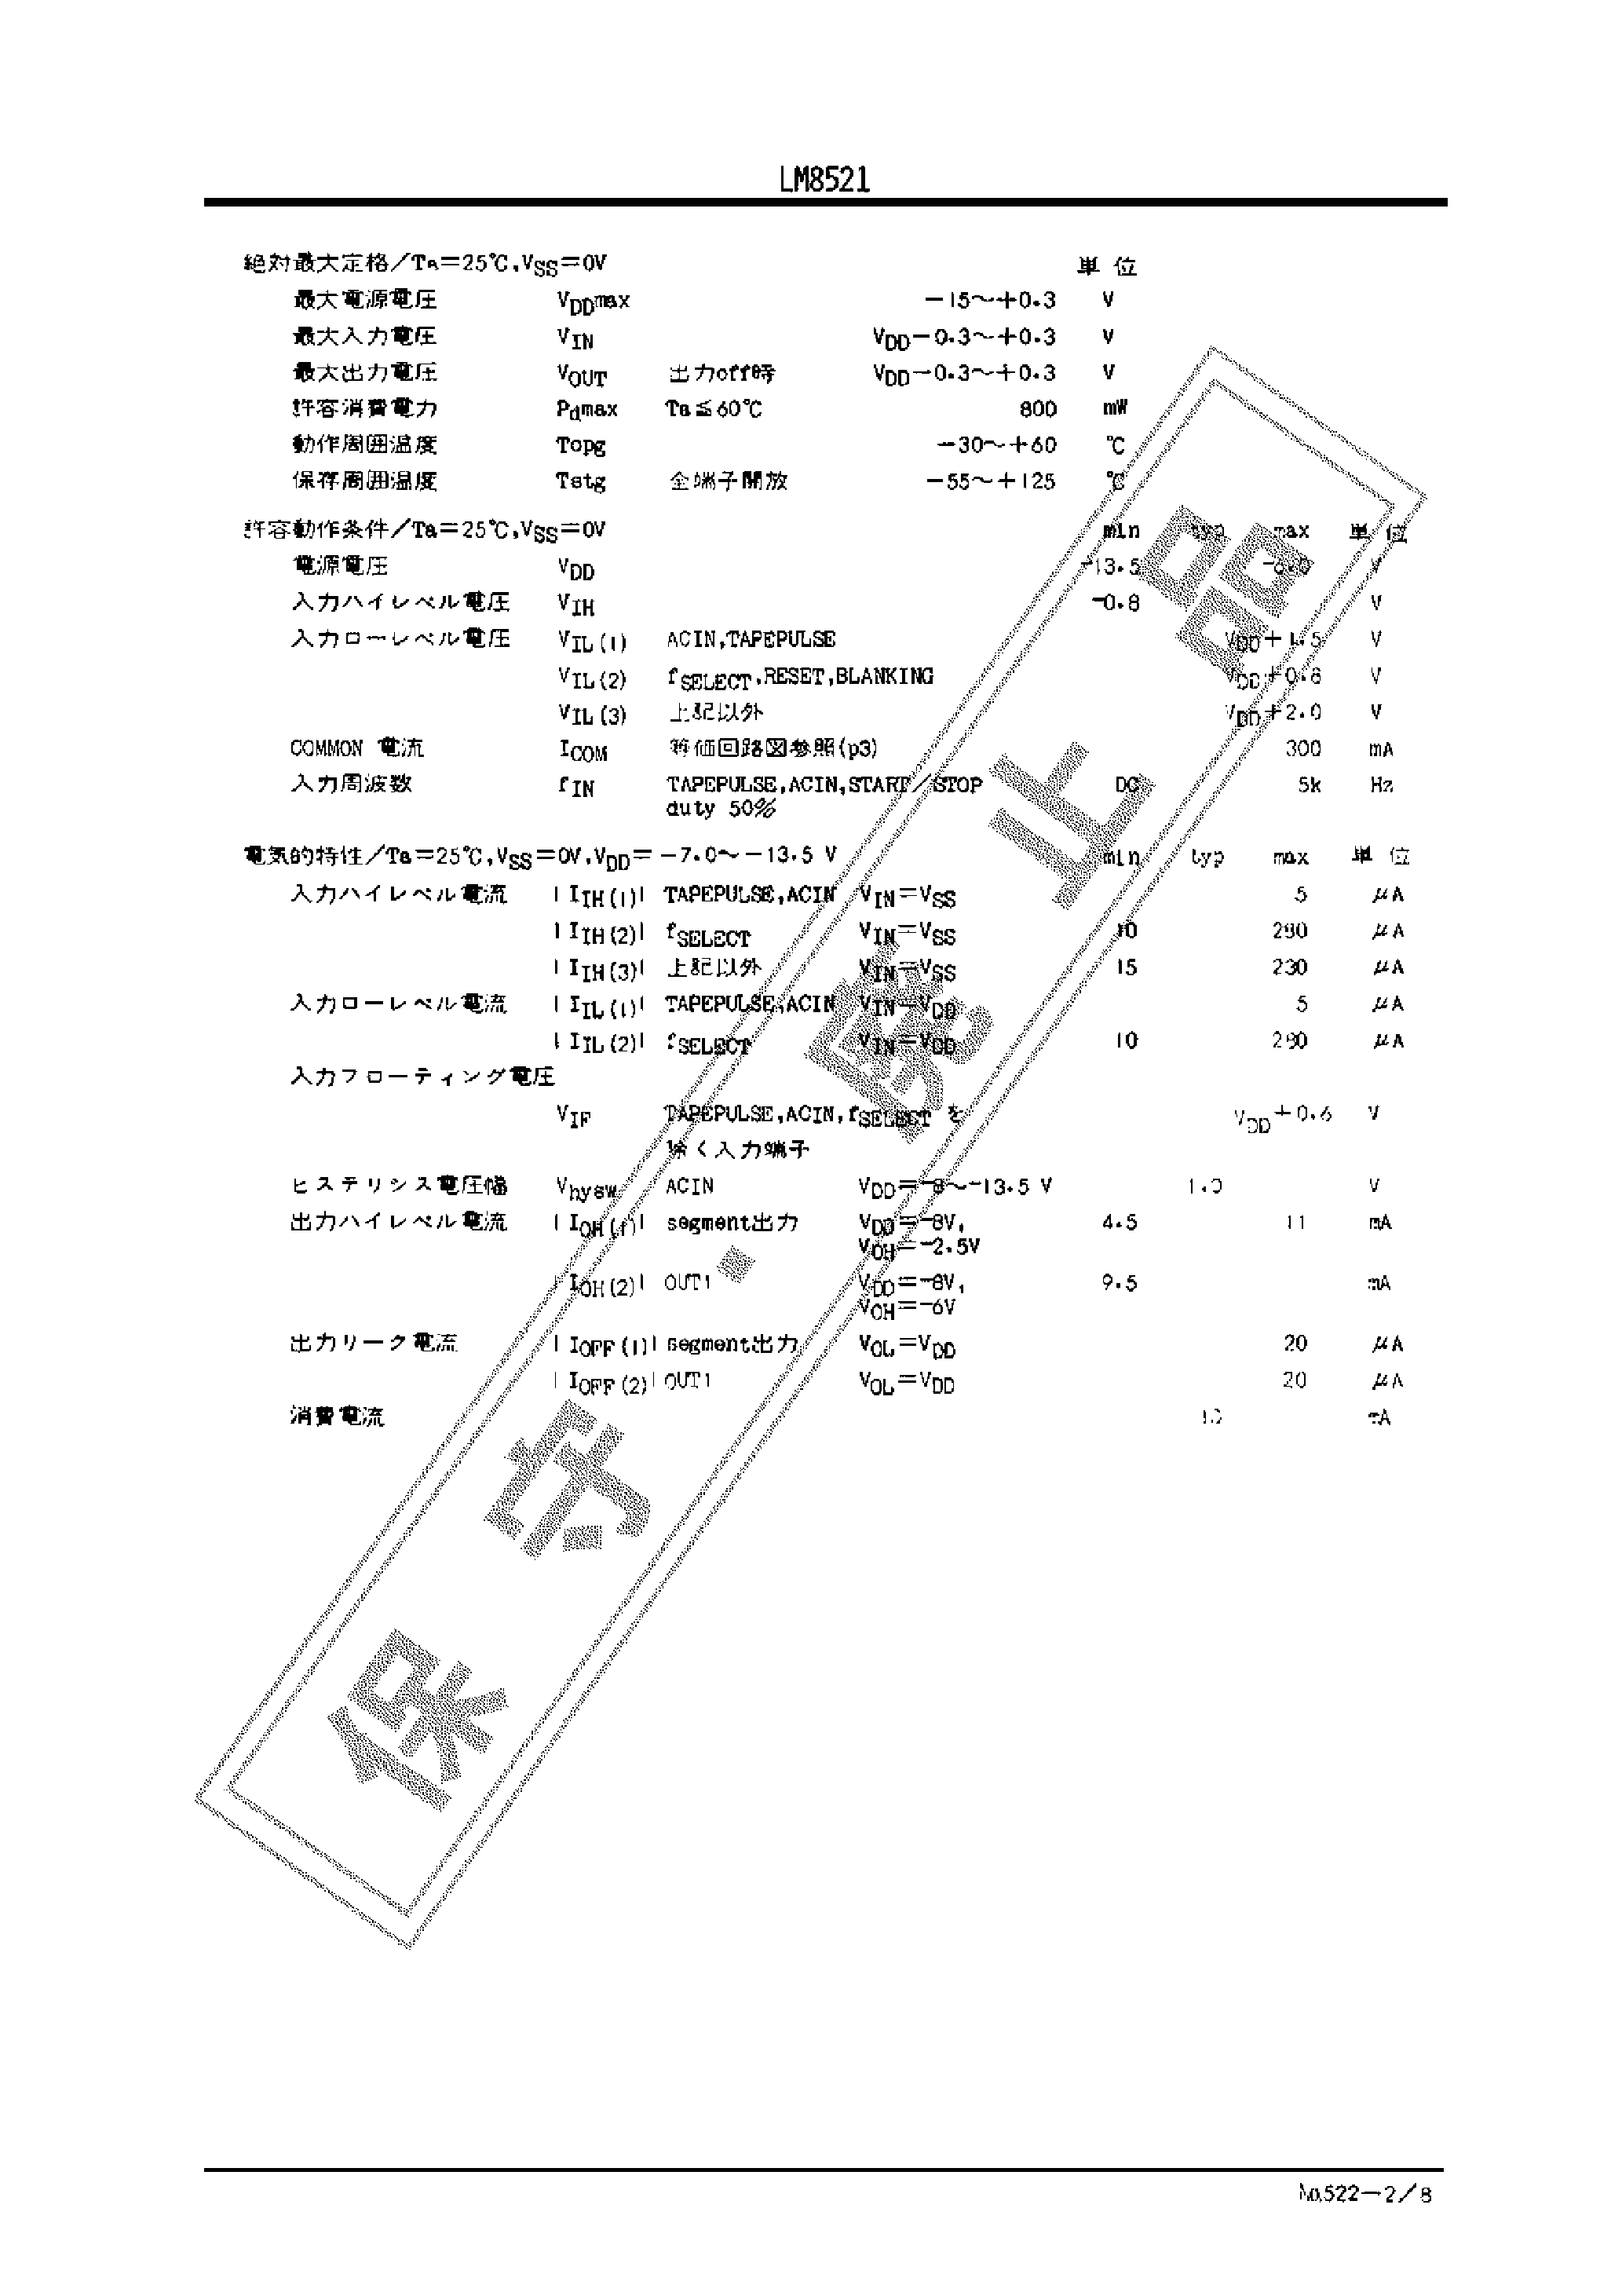 Datasheet LM8521 - P-MOS LSI page 2